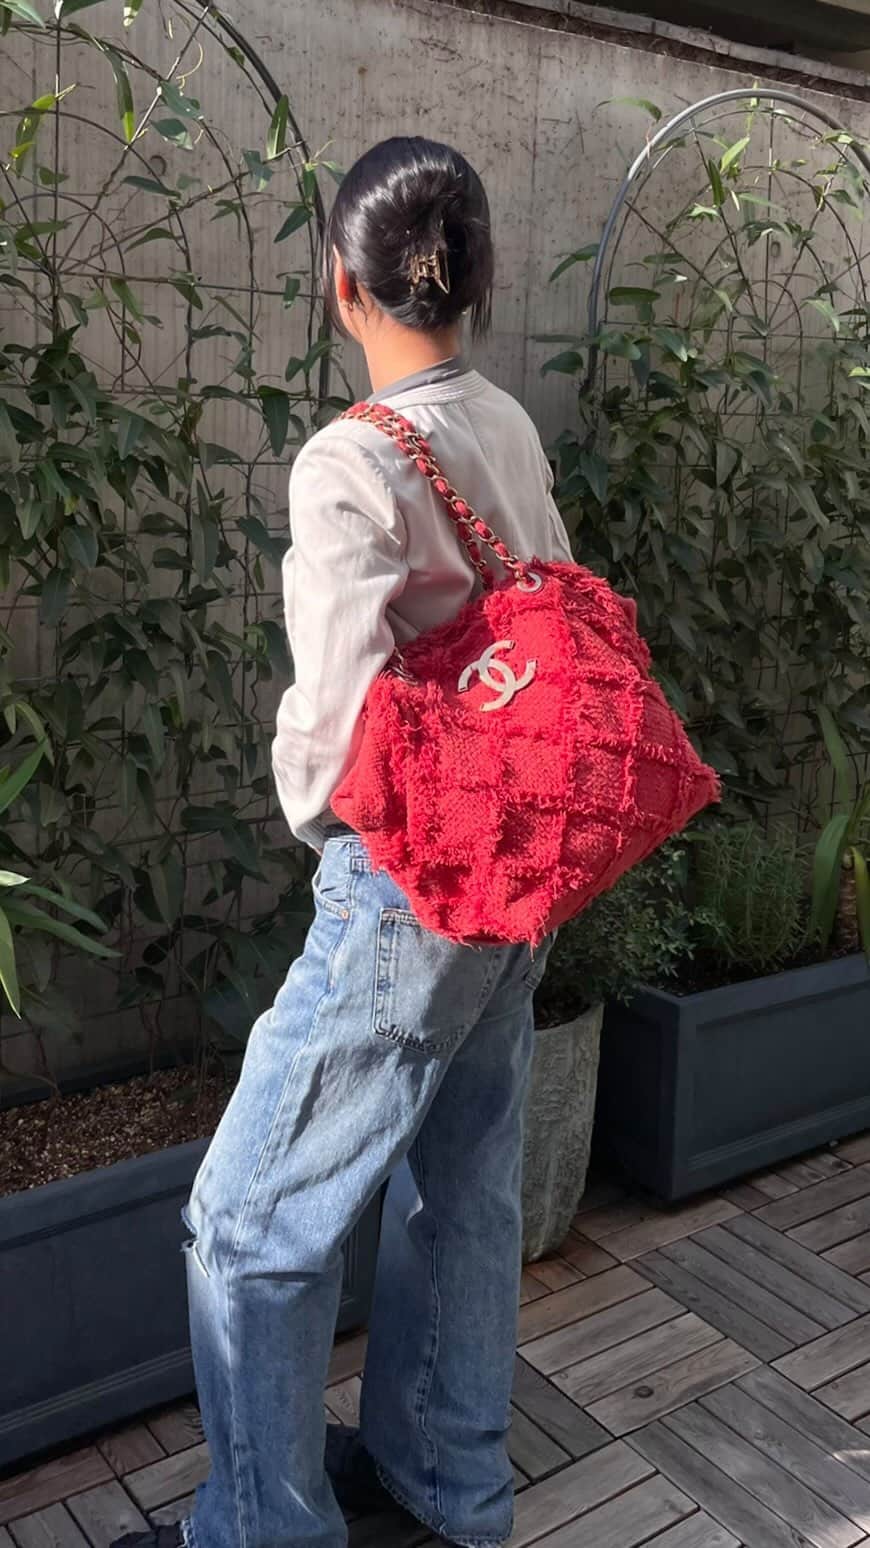 vintage Qooのインスタグラム：「Style with a colored bag for your autumn outfit💖  ▼Customer service English/Chinese/Korean/Japanese *Please feel free to contact us! *商品が見つからない場合にはDMにてお問い合わせください   ▼International shipping via our online store. Link in bio.  #tokyovintageshop #오모테산도 #omotesando #aoyama #表參道 #명품빈티지 #빈티지패션 #도쿄빈티지샵  #ヴィンテージファッション #ヴィンテージショップ #chanelvintage #chanel #vintagechanel #chanelclassic #chanellover #빈티지샤넬 #샤넬  #シャネル #샤넬클래식」